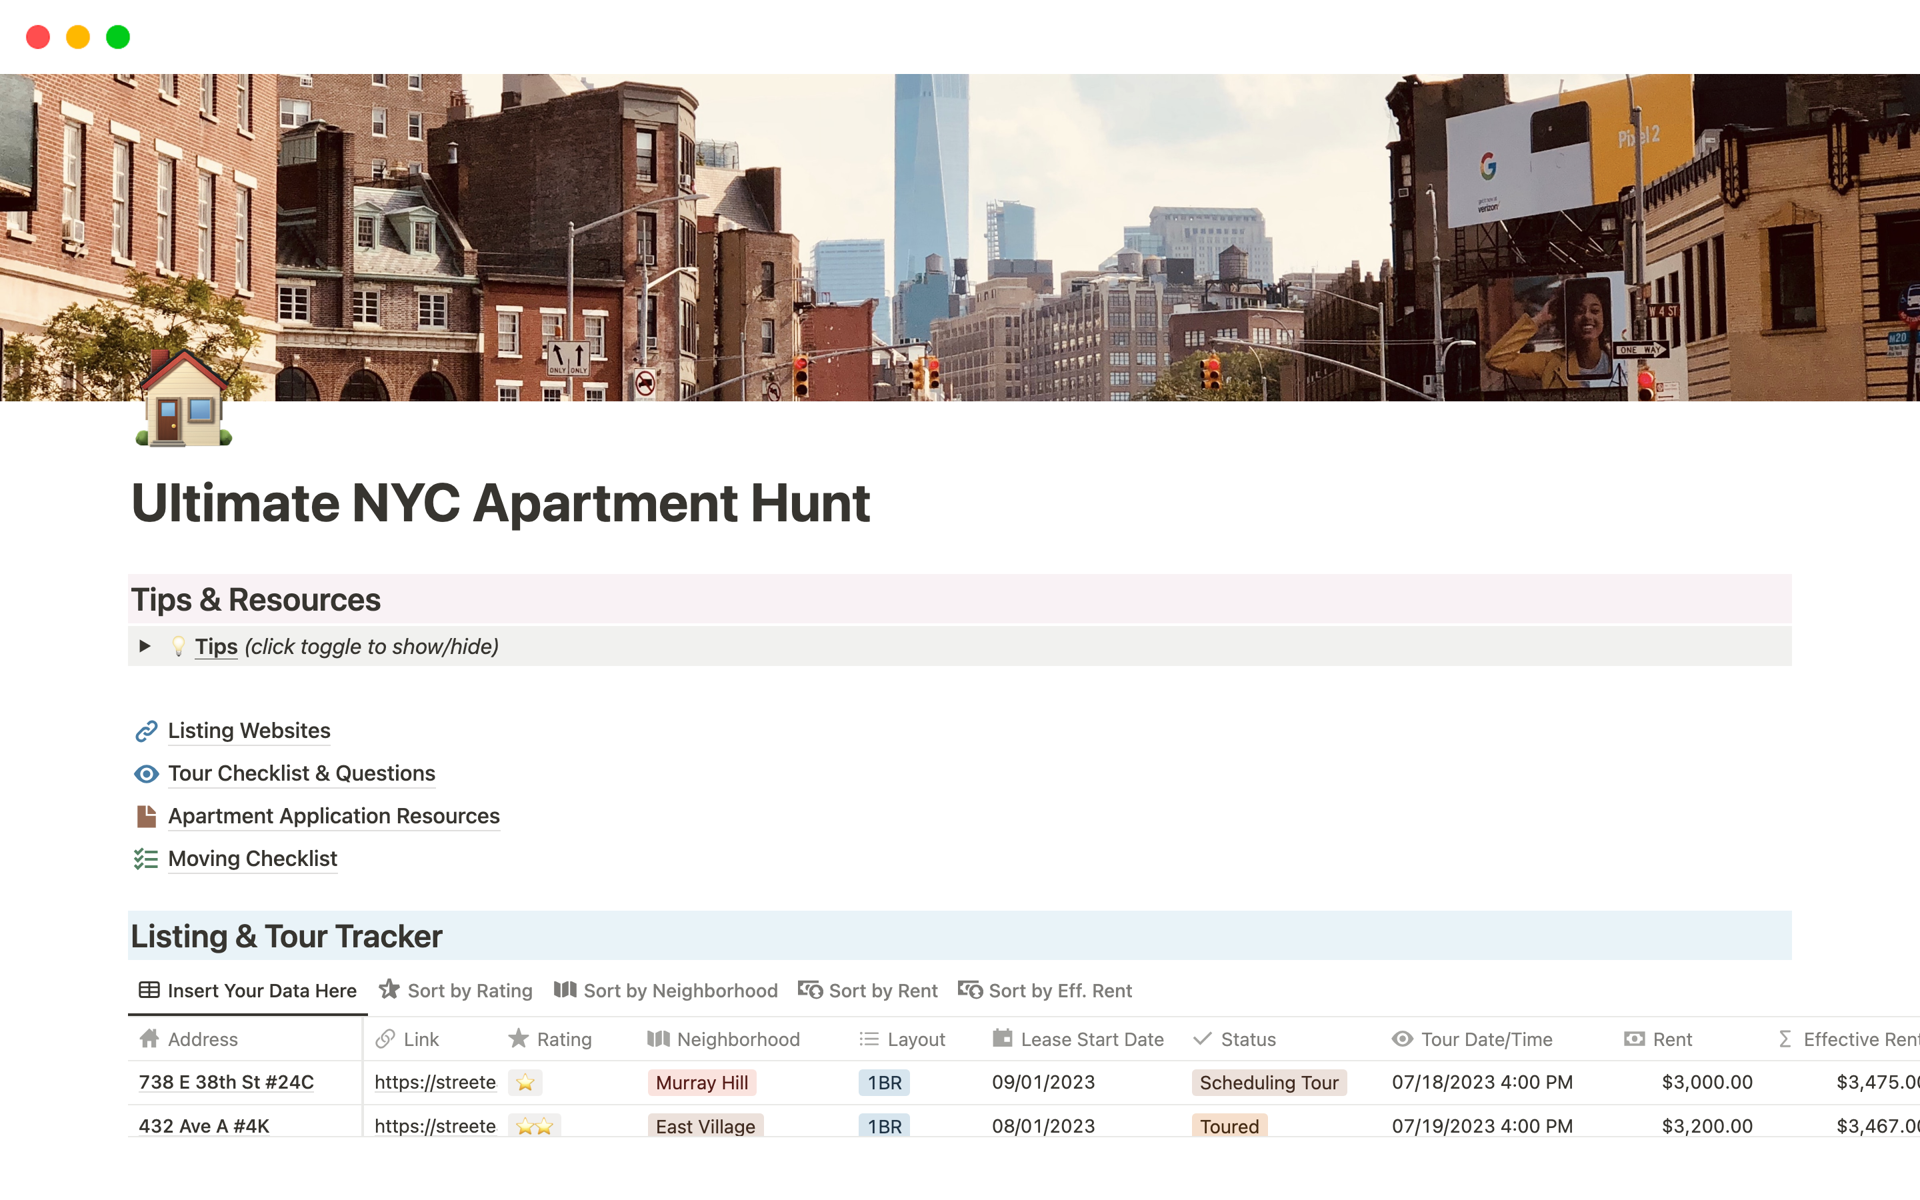 The ultimate template for your NYC apartment hunt (or any other city!)